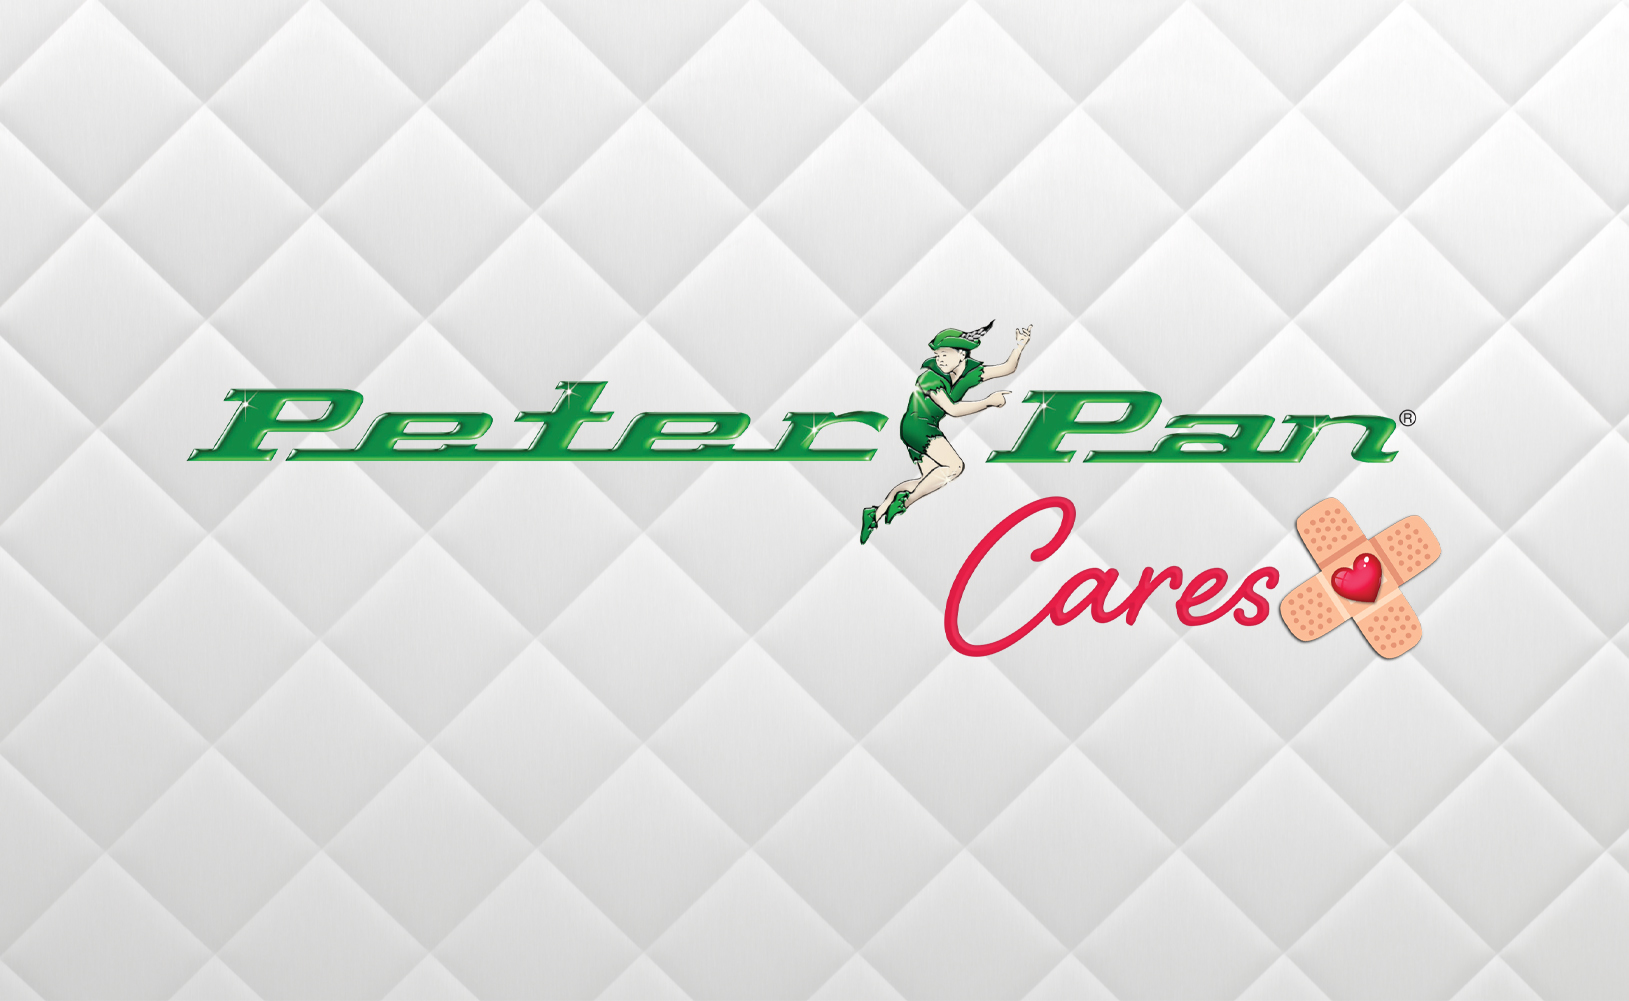 Peter Pan Cares Mobile Testing & Vaccination Stations